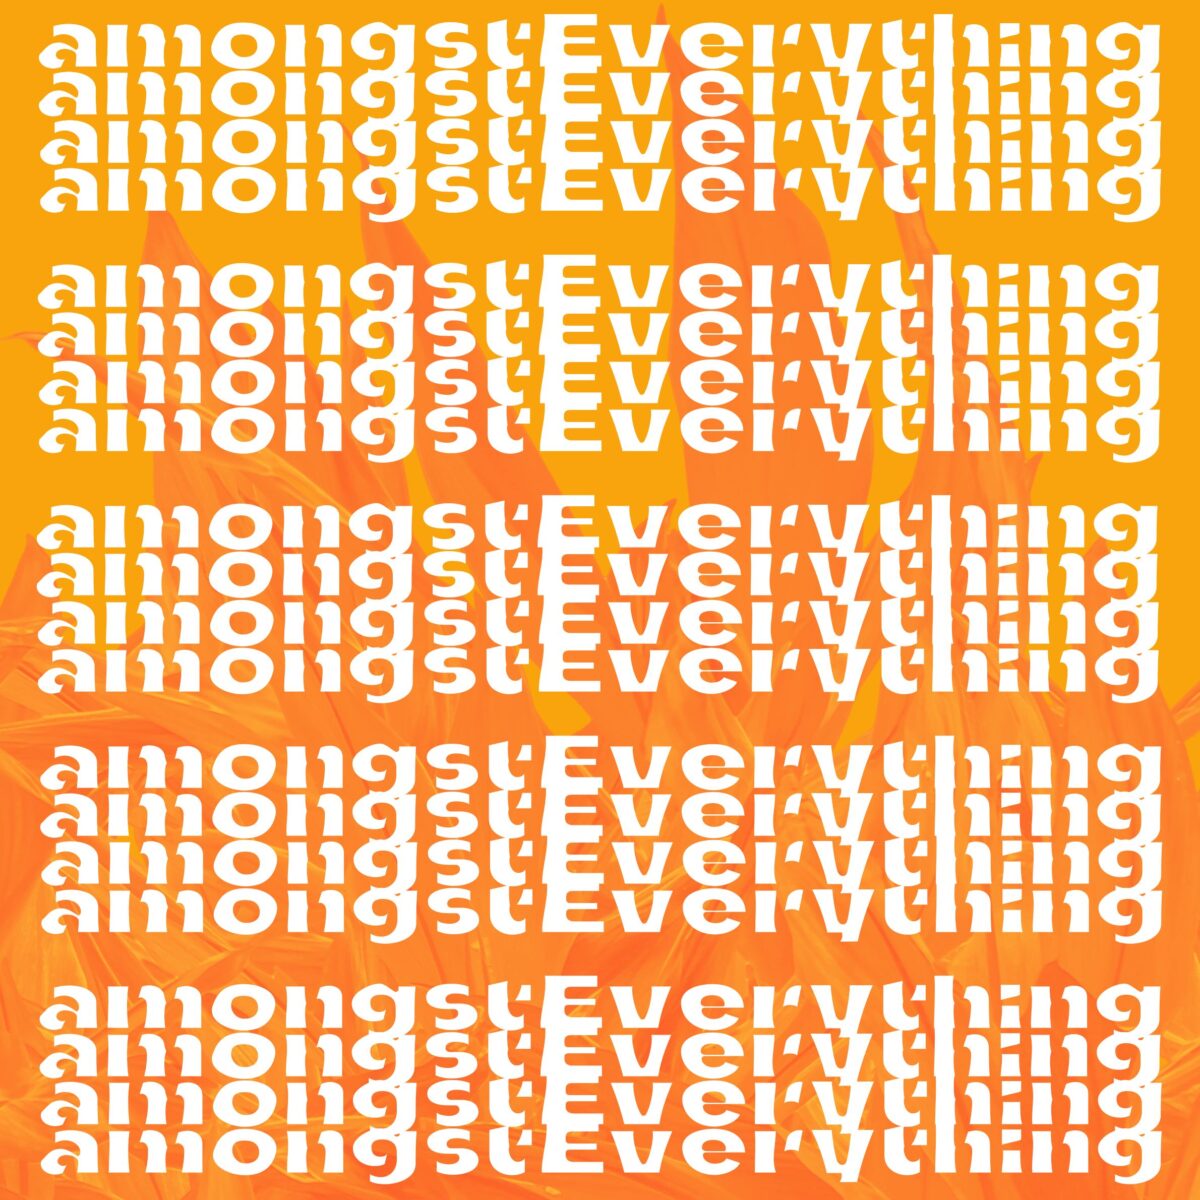 orange and yellow background with the text "amongst everything" repeated over and over.